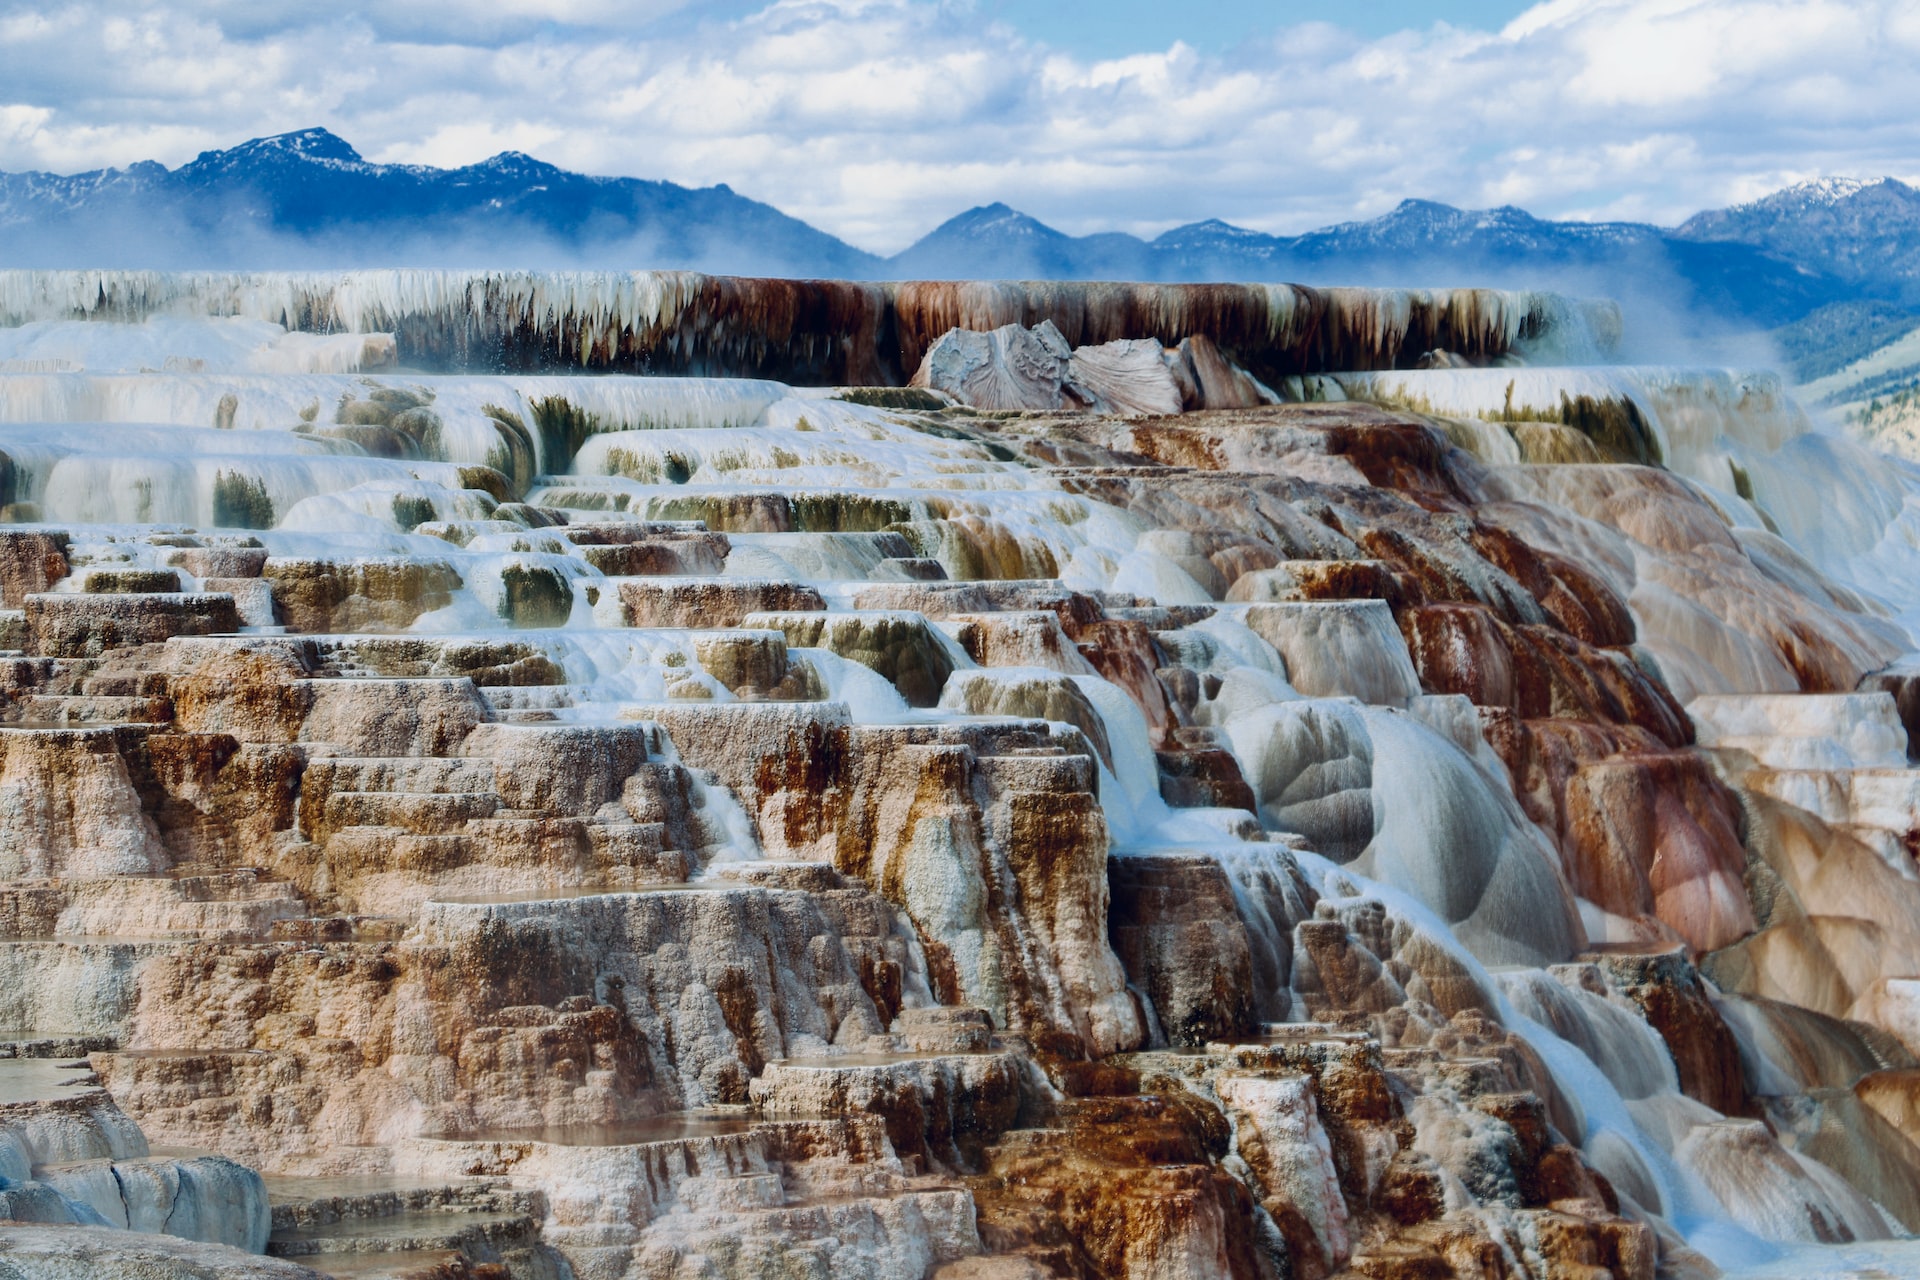 The Mammoth Hot Springs in Yellowstone National Park.